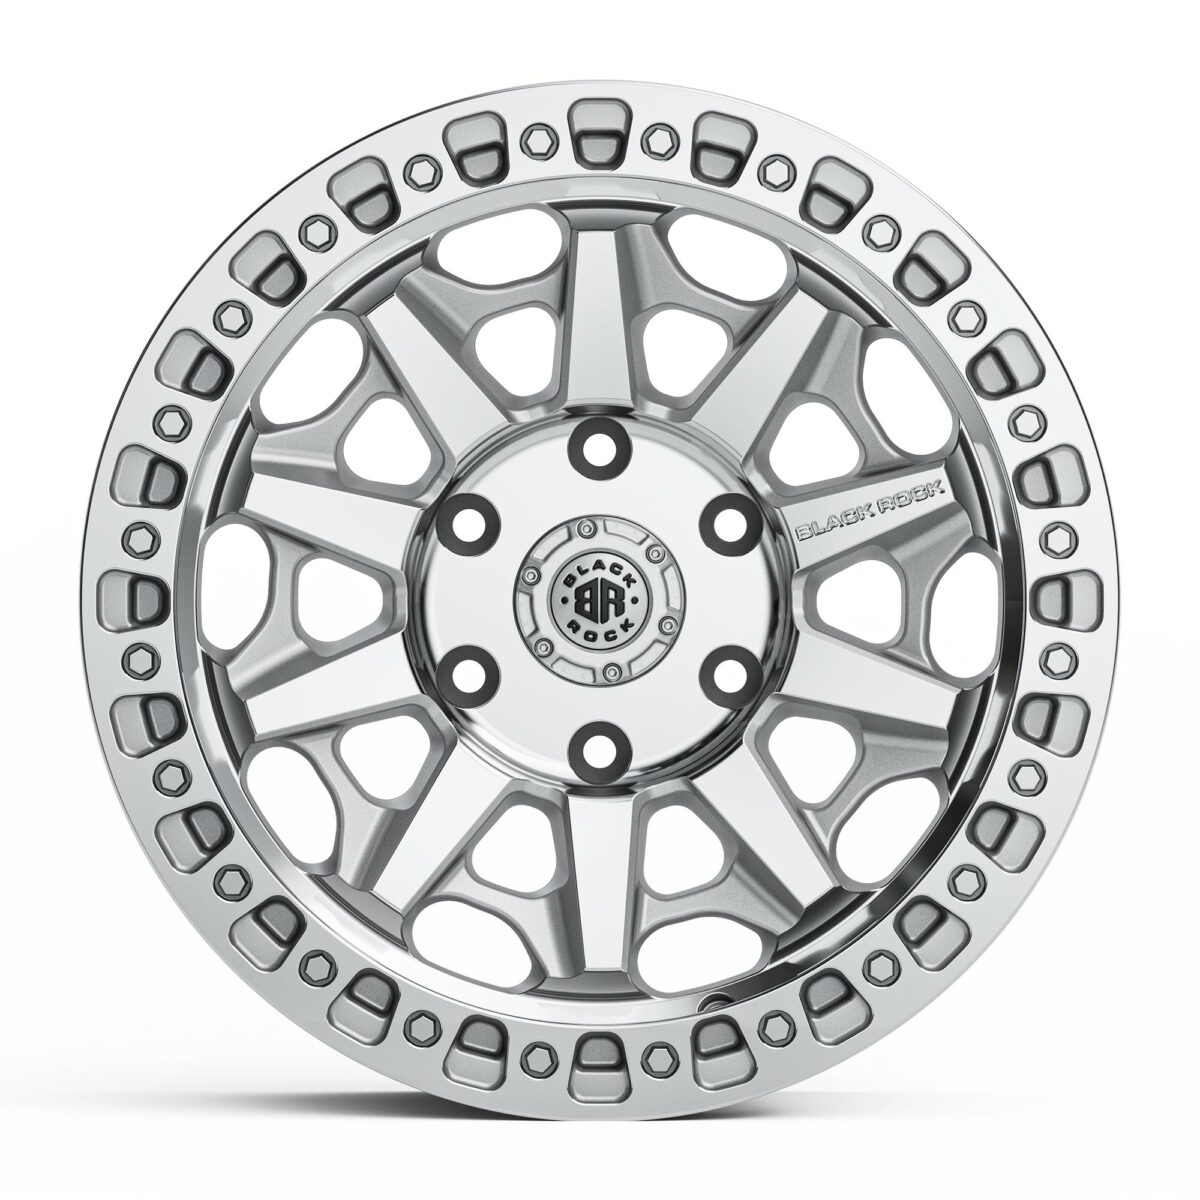 4x4 Wheels Black Rock Cage Silver Machined Off-Road 17 inch 17x8